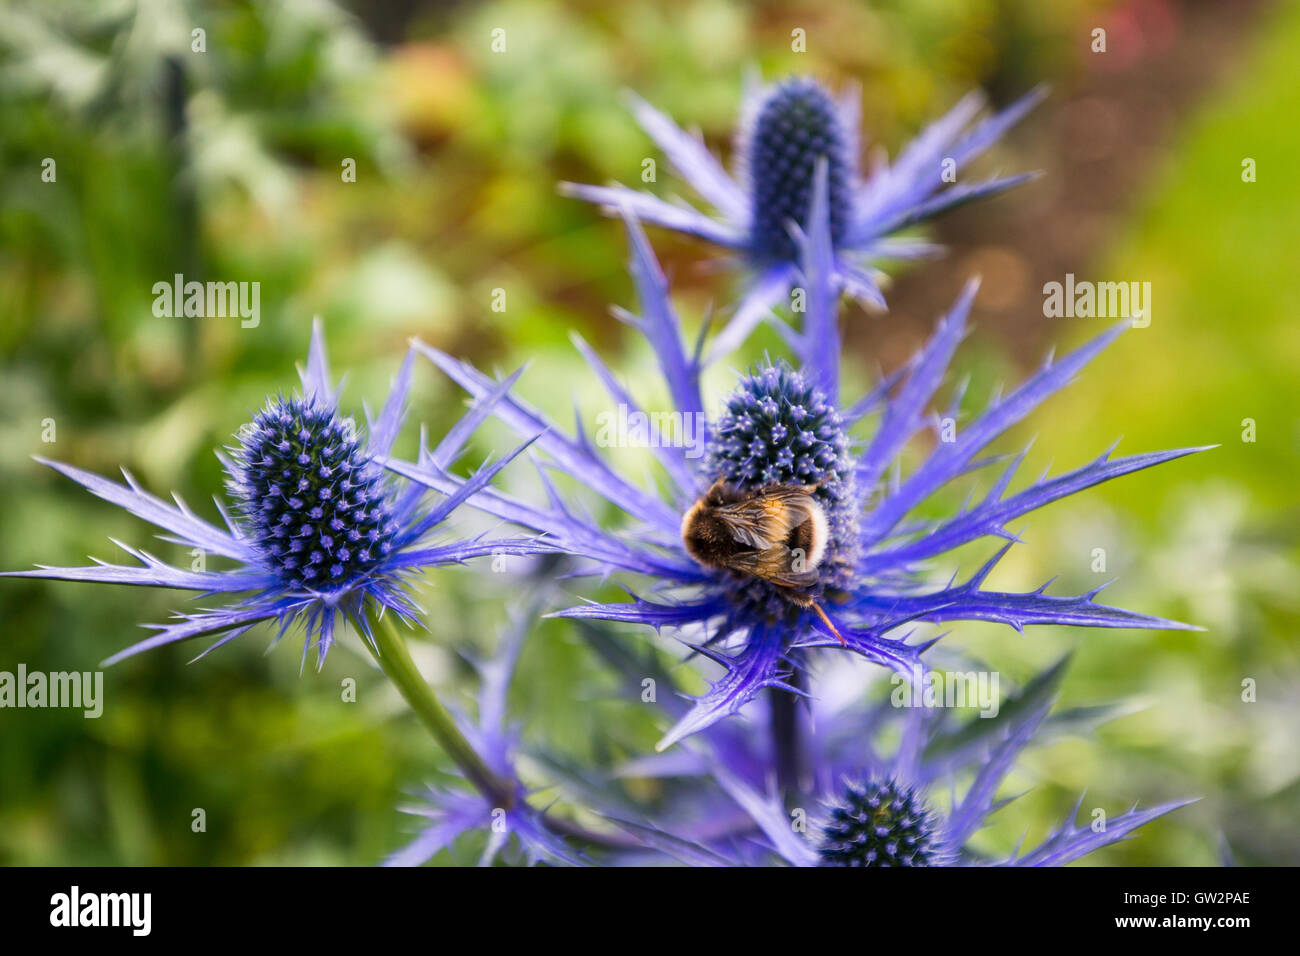 Eryngium Picos, sea holly, with worker bee during summer blooming. England UK Stock Photo